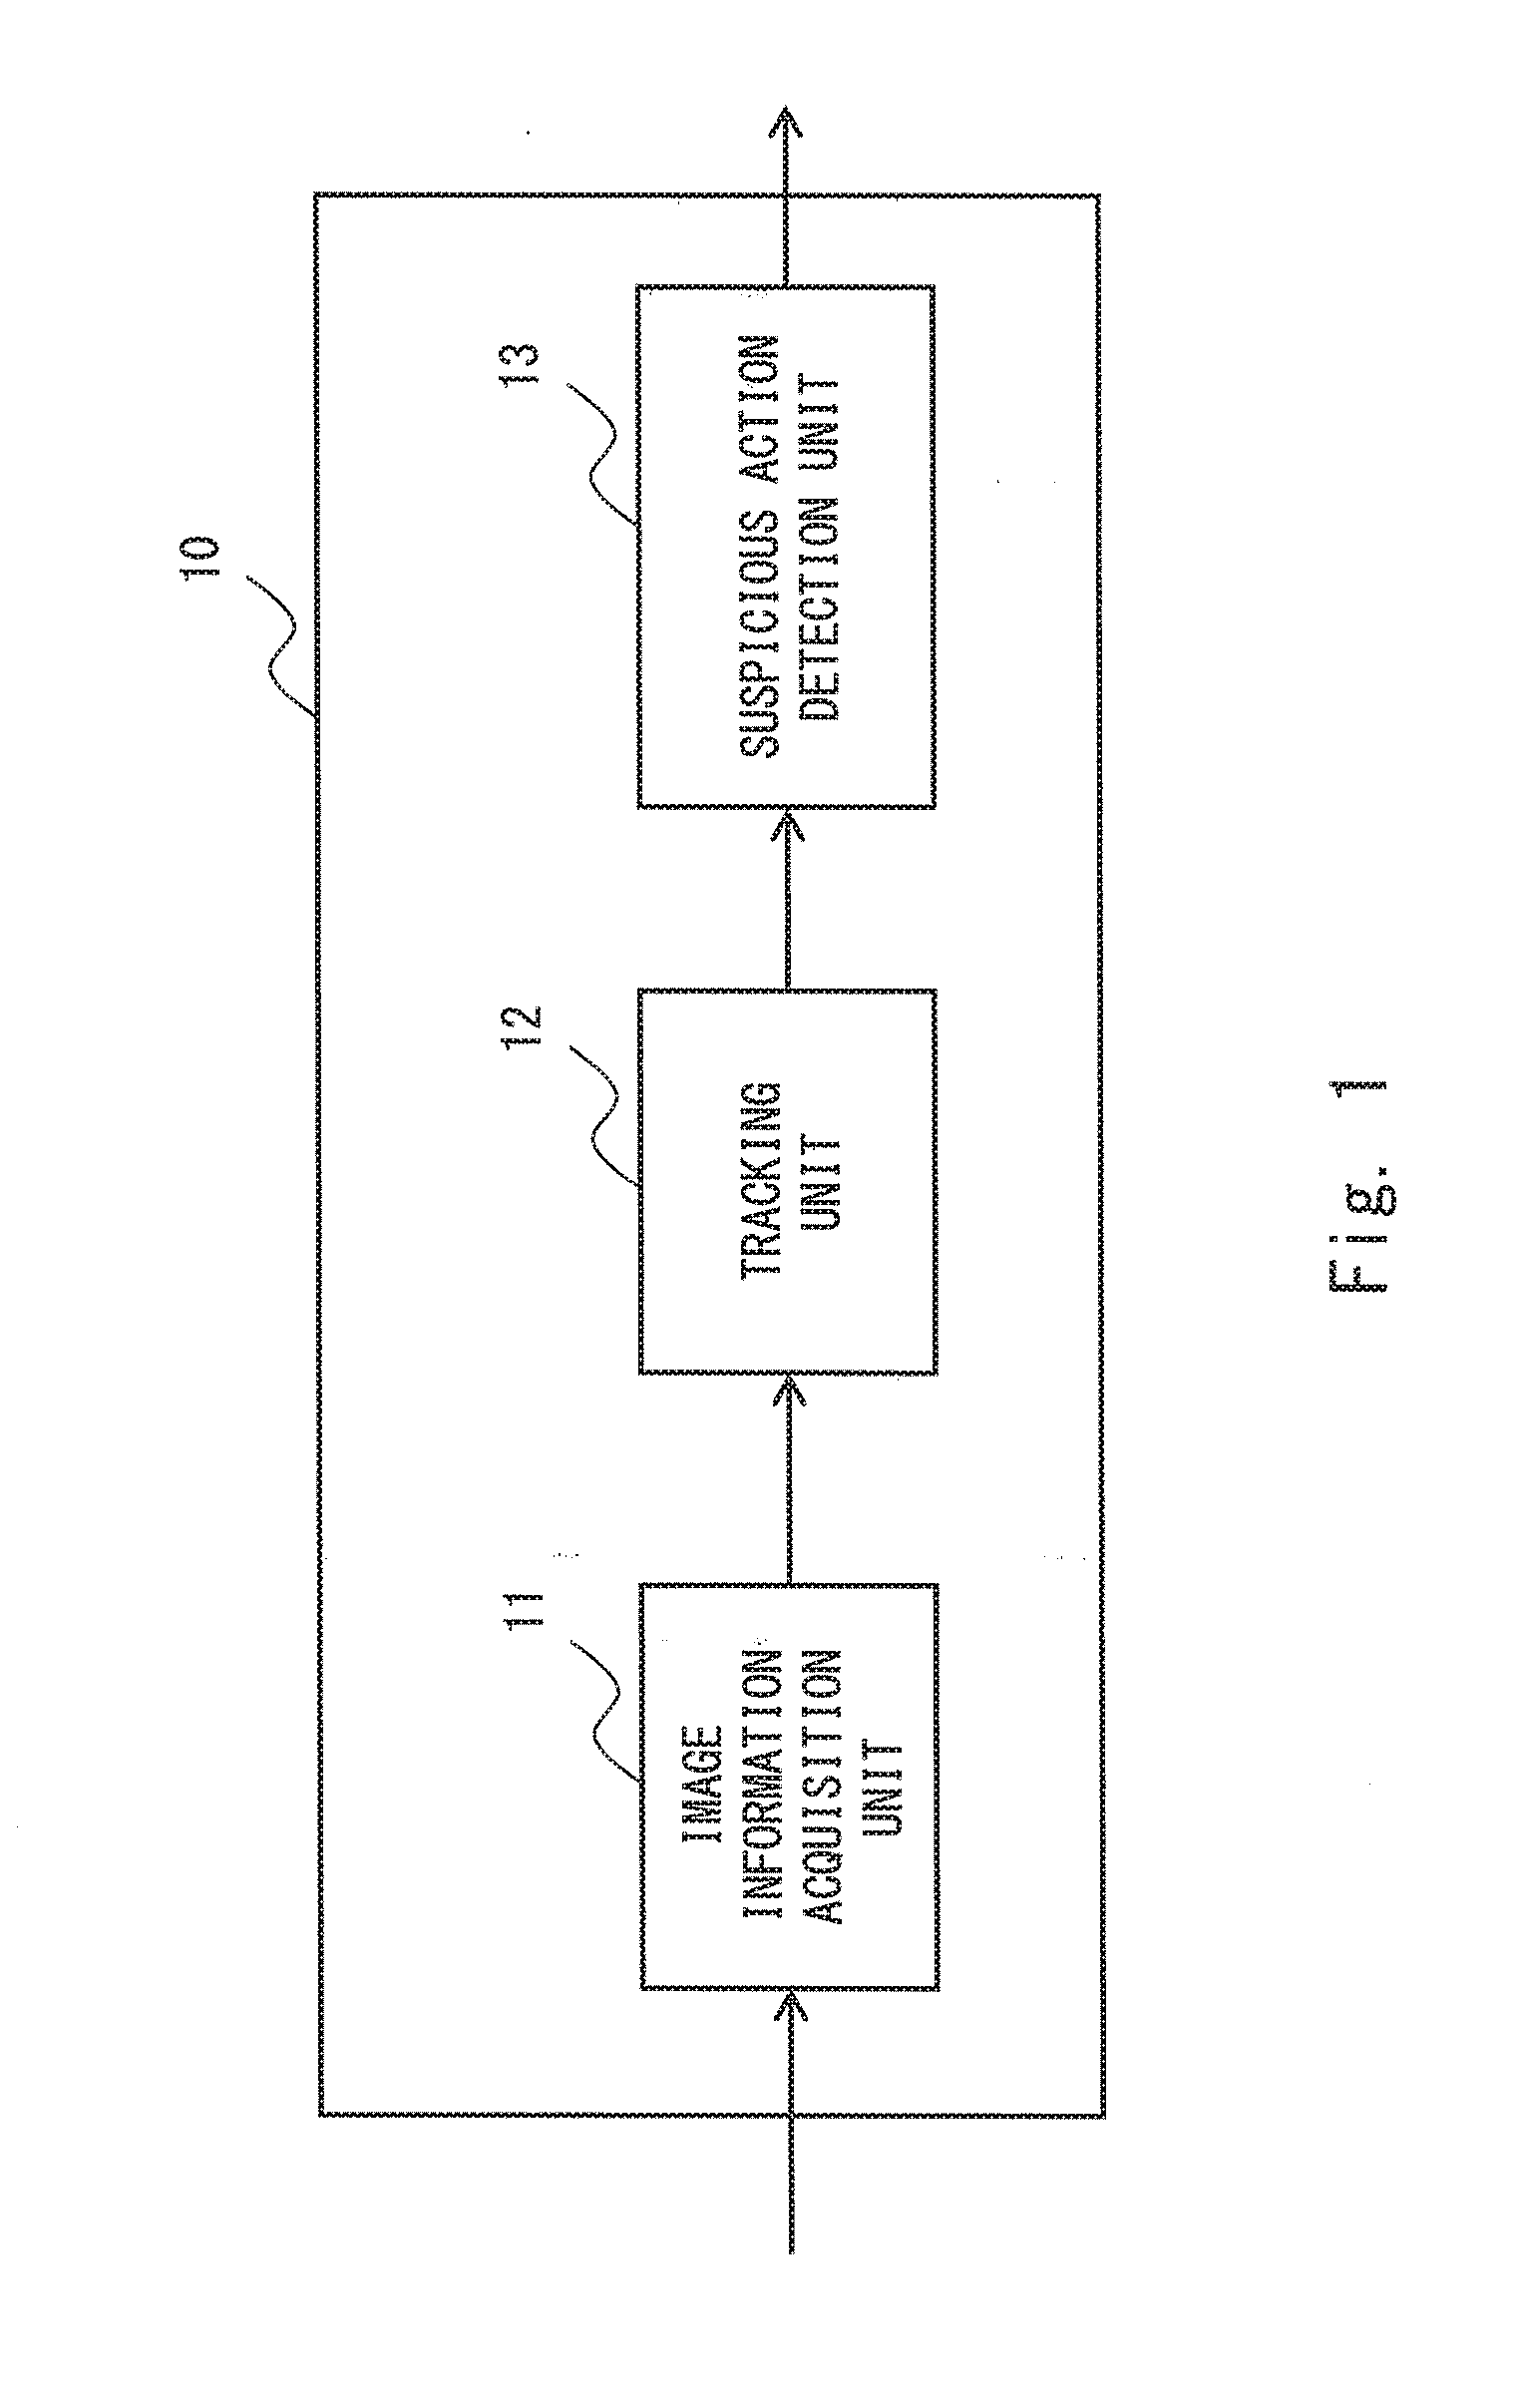 Security system, security method, and non-transitory computer readable medium